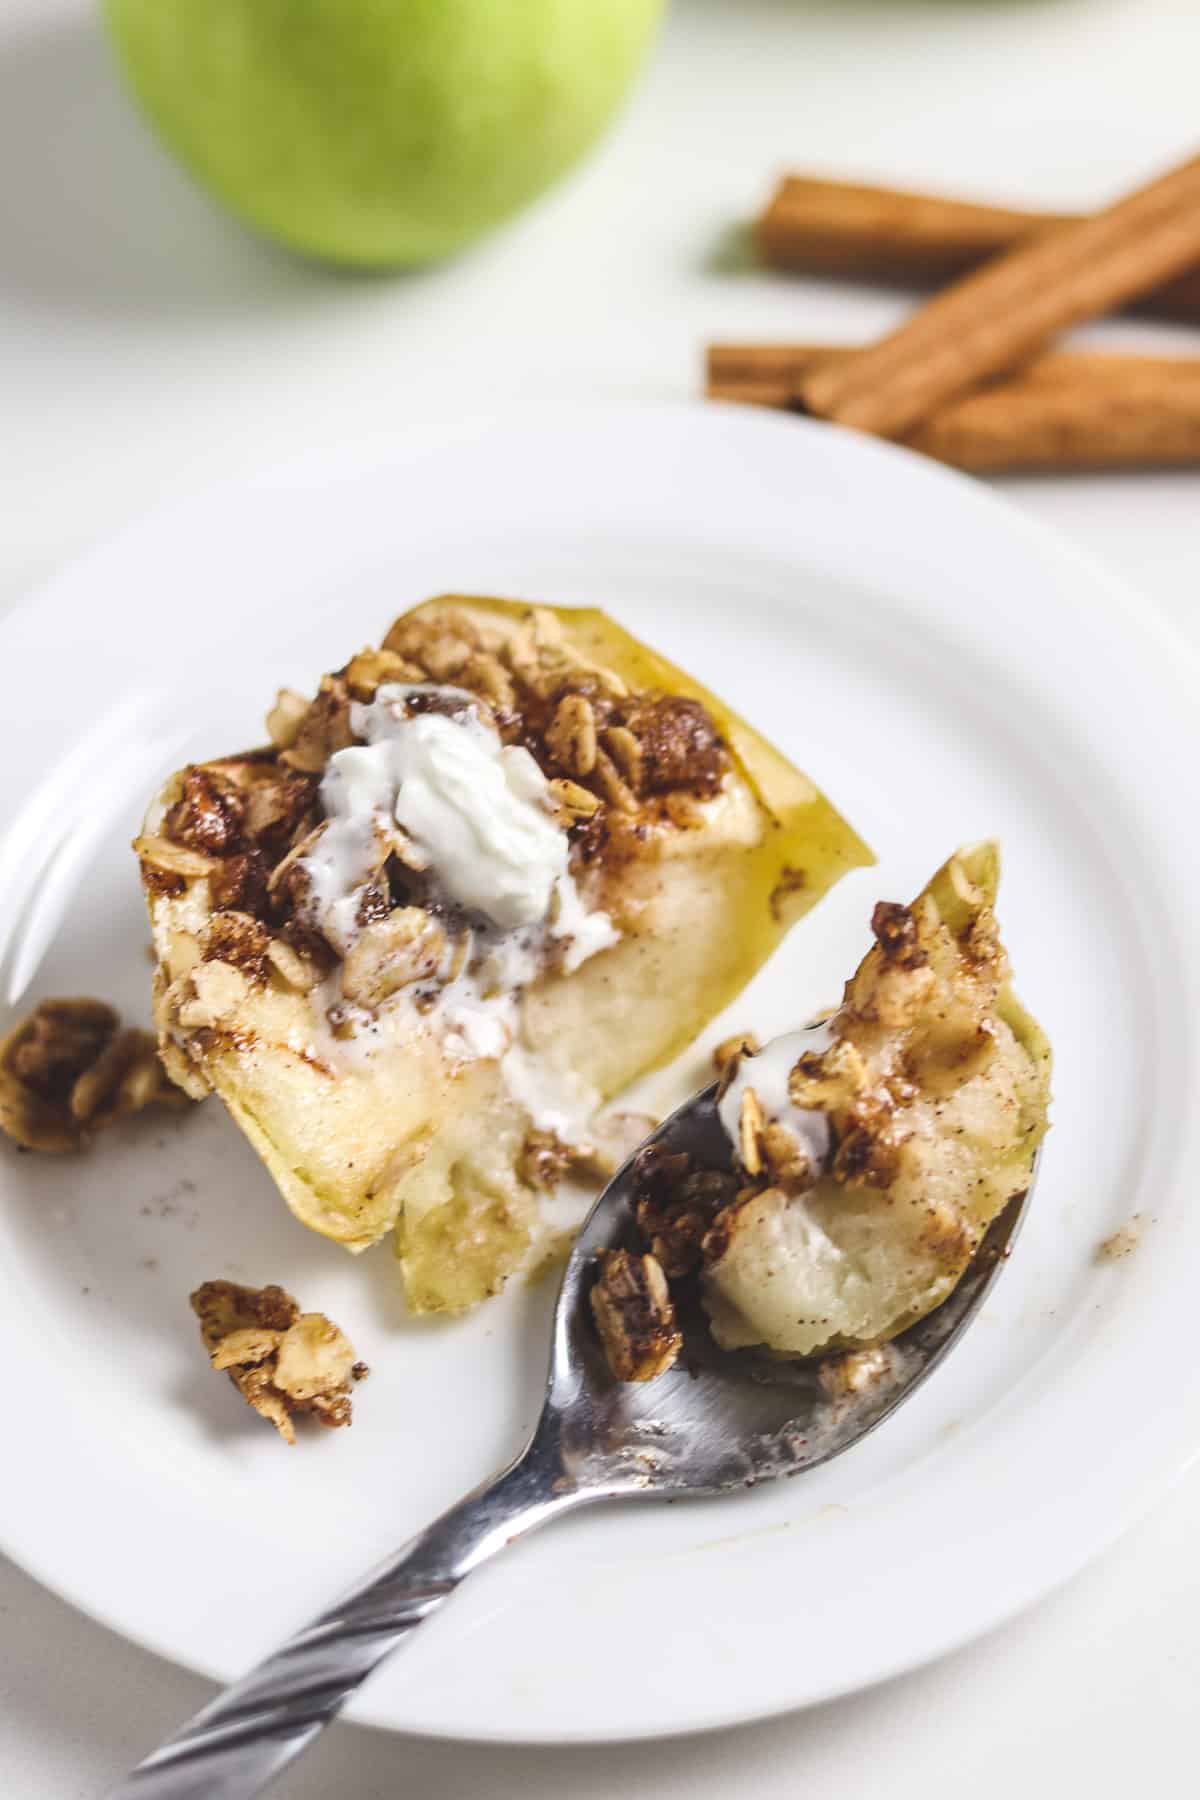 spoonful of air fryer baked apple on plate